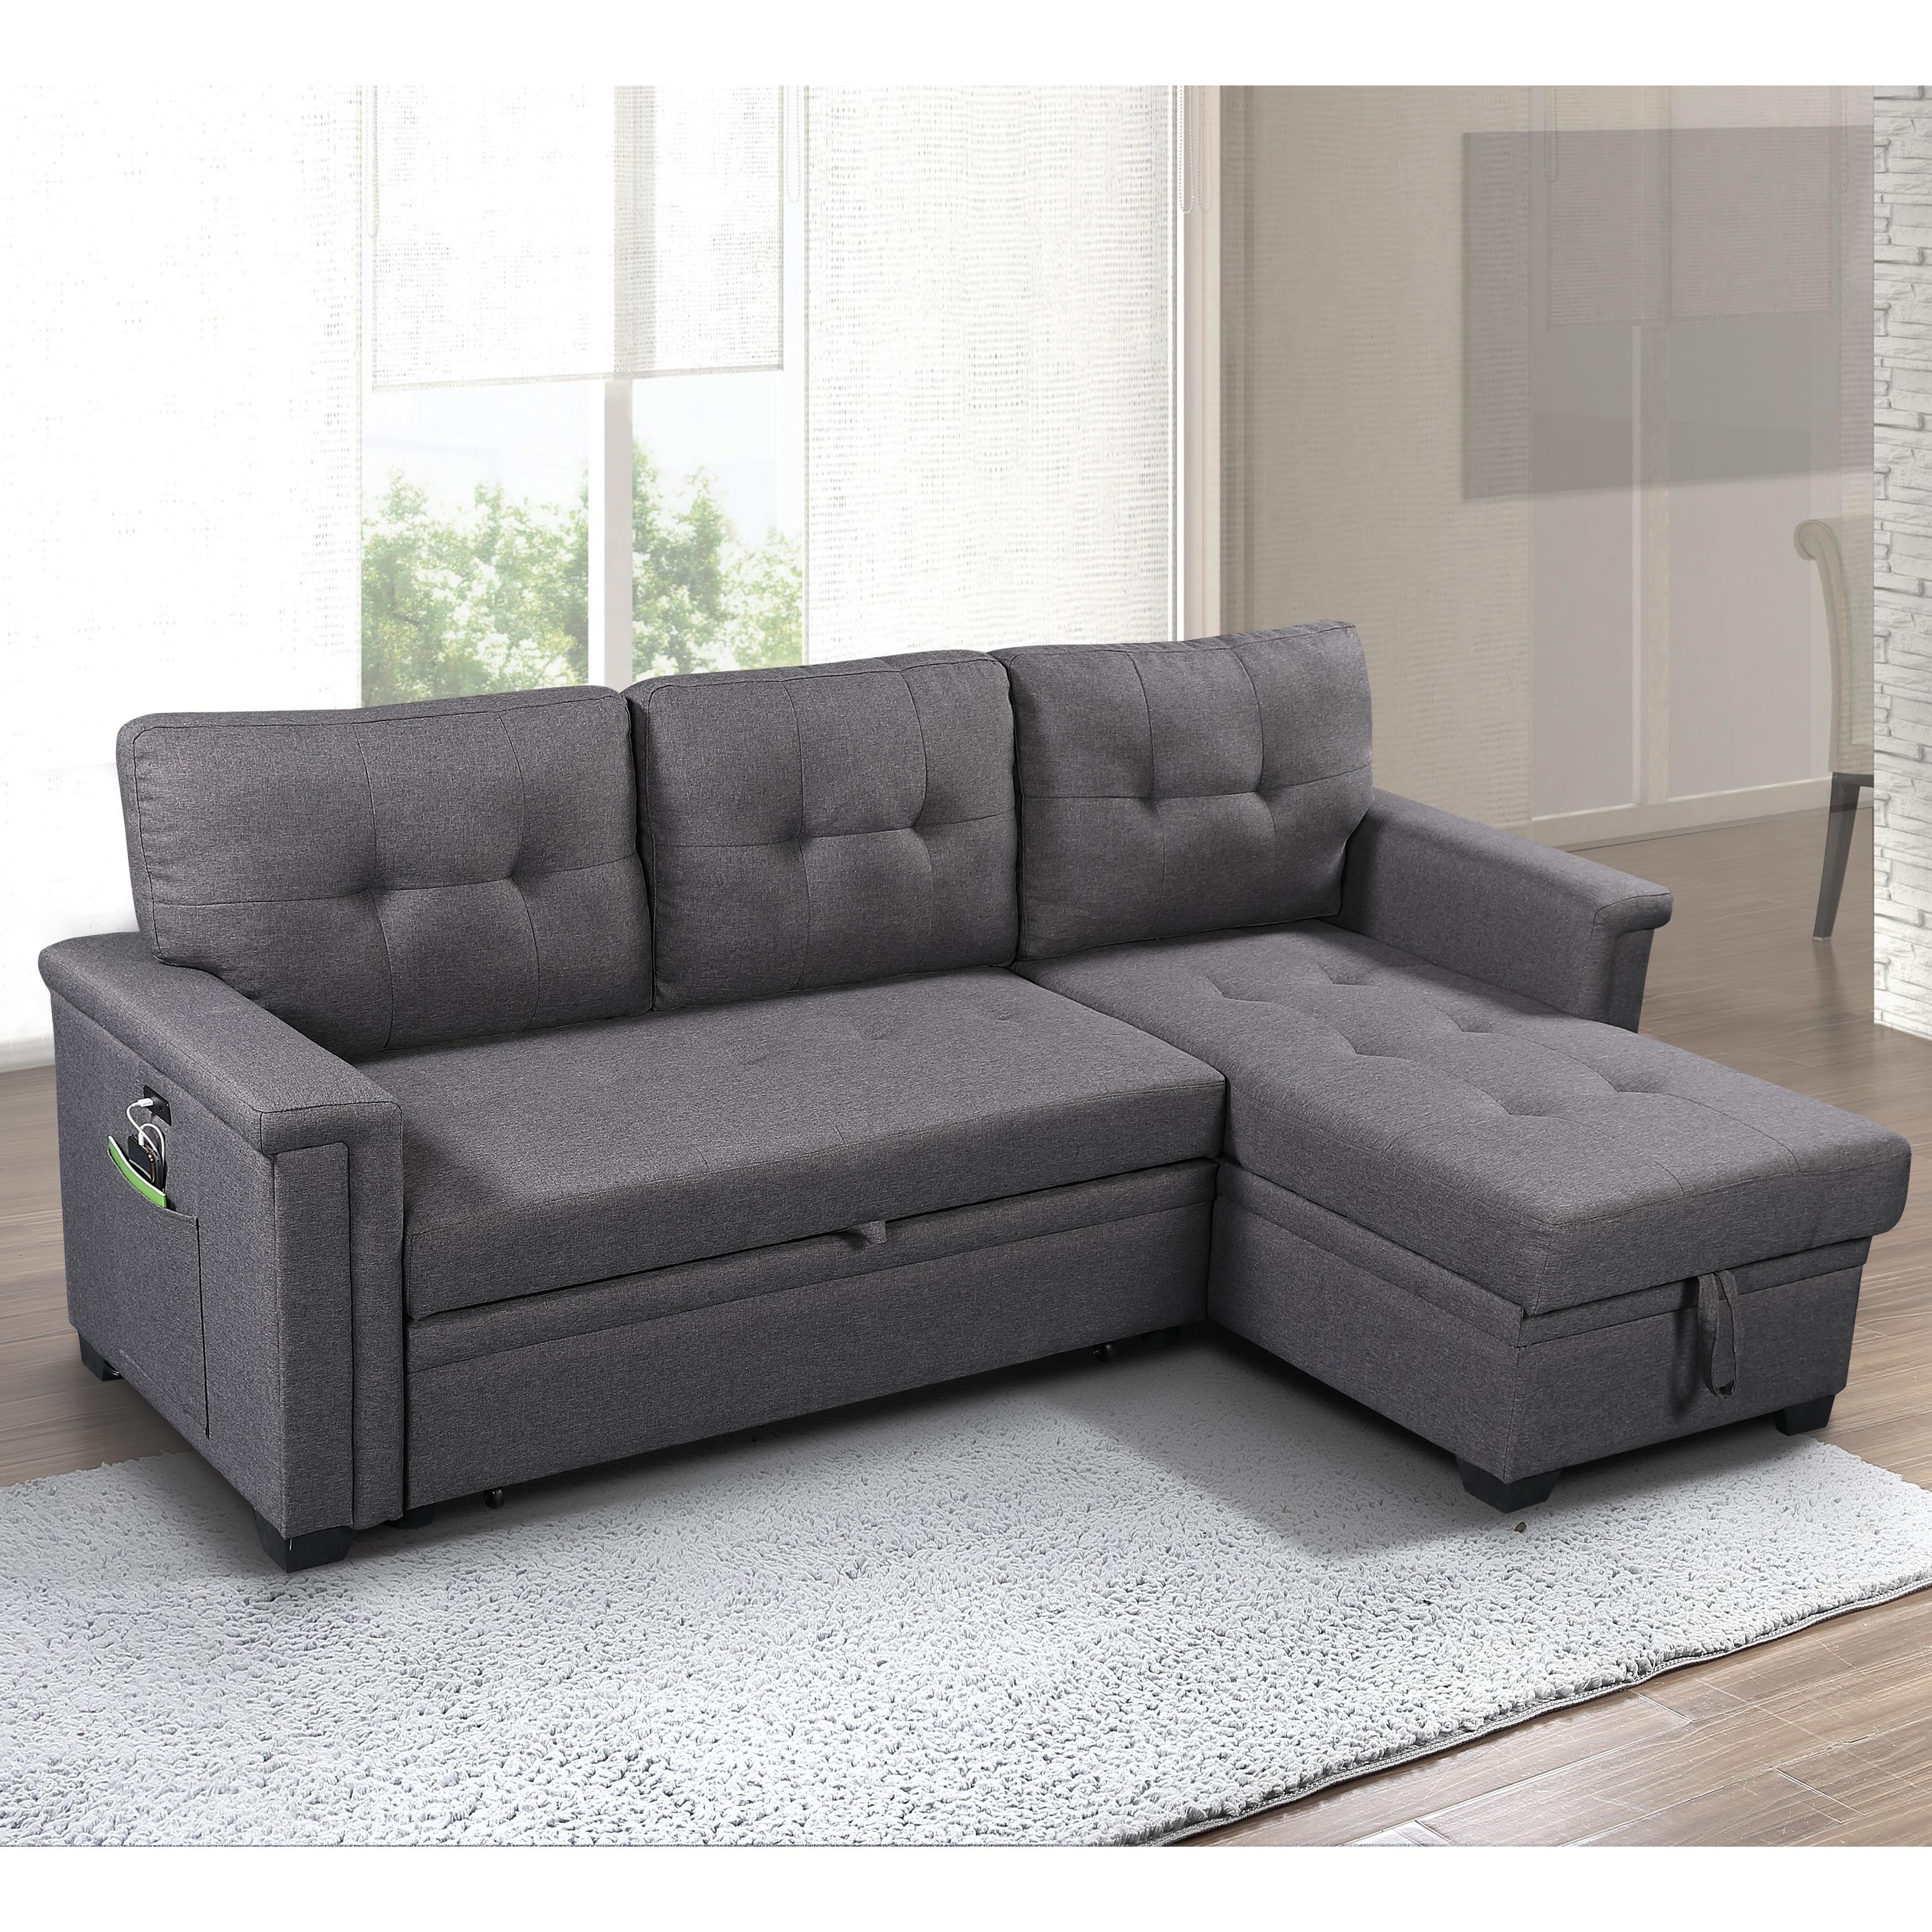 Ashlyn Reversible Sleeper Sofa With Storage Chaise – – 30144937 Pertaining To Reversible Pull Out Sofa Couches (View 5 of 20)